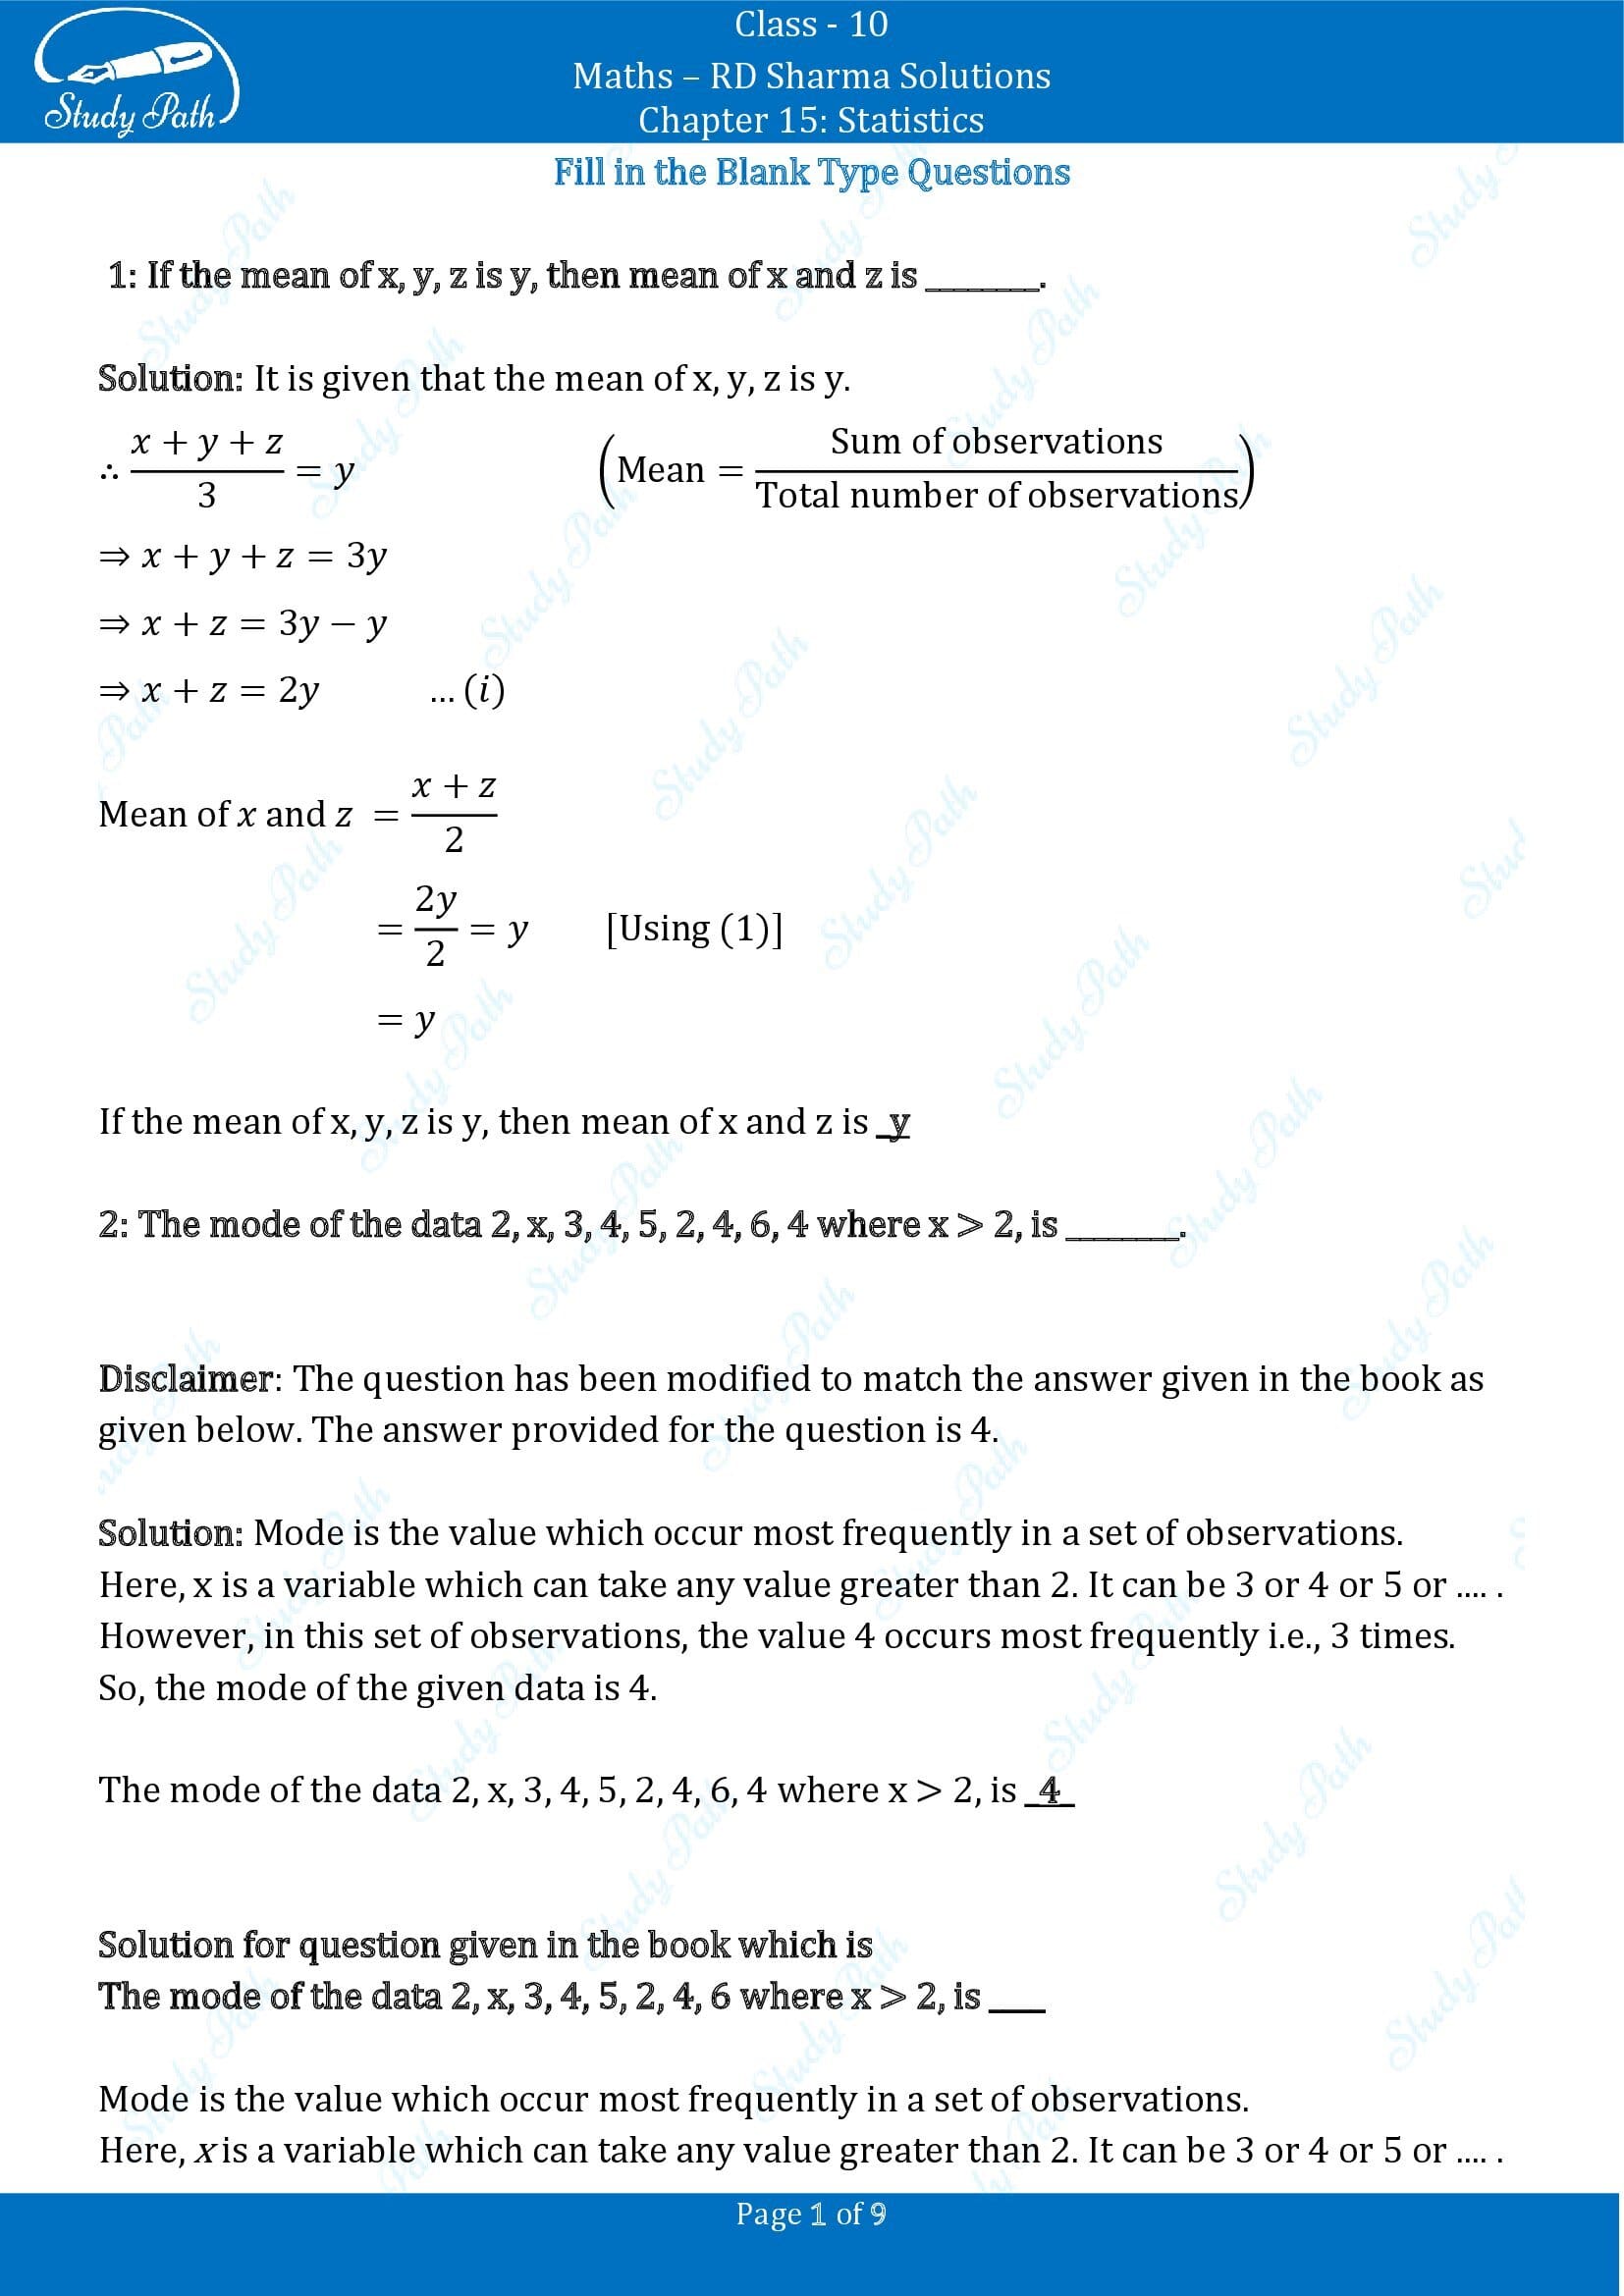 RD Sharma Solutions Class 10 Chapter 15 Statistics Fill in the Blank Type Questions FBQs 00001